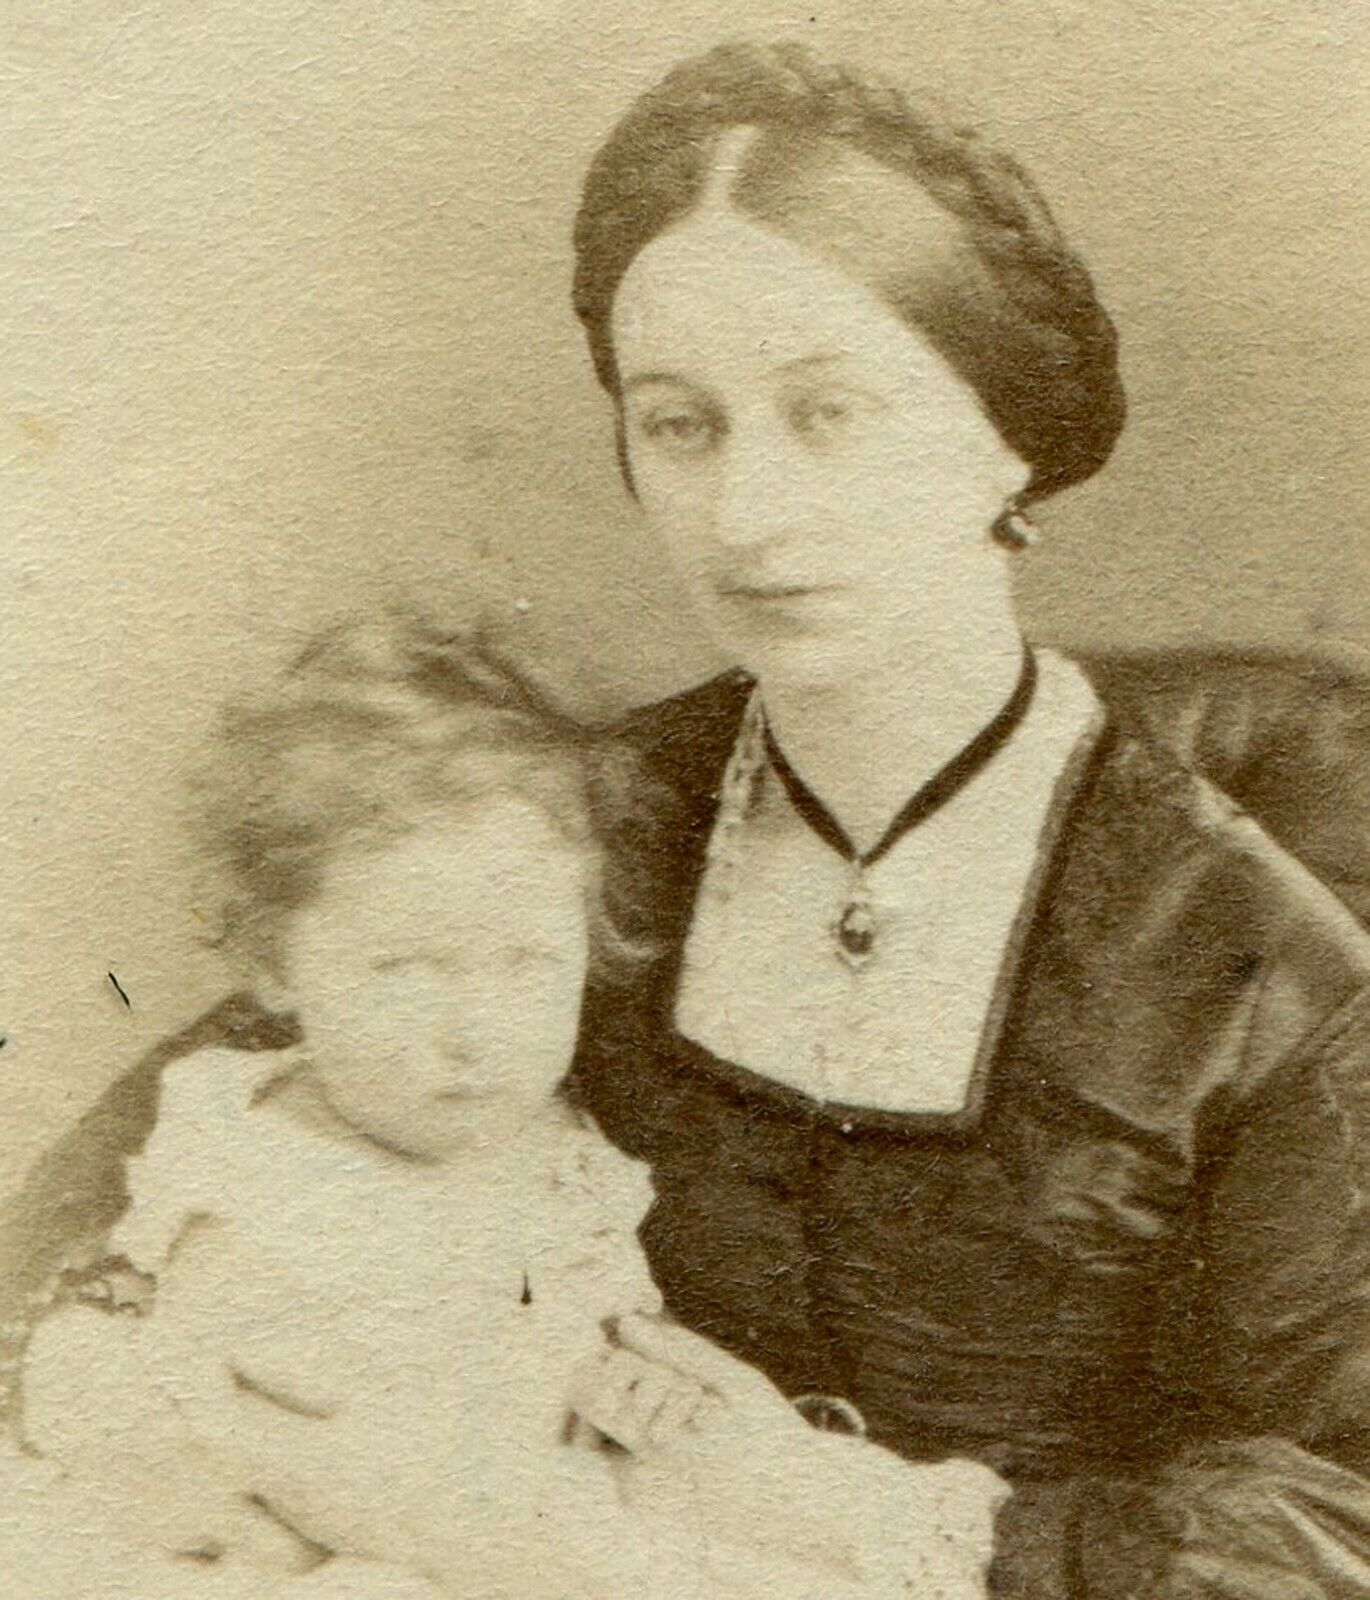 DAZED LOOKING WOMAN HOLDING YOUNG CHILD. CDV. 